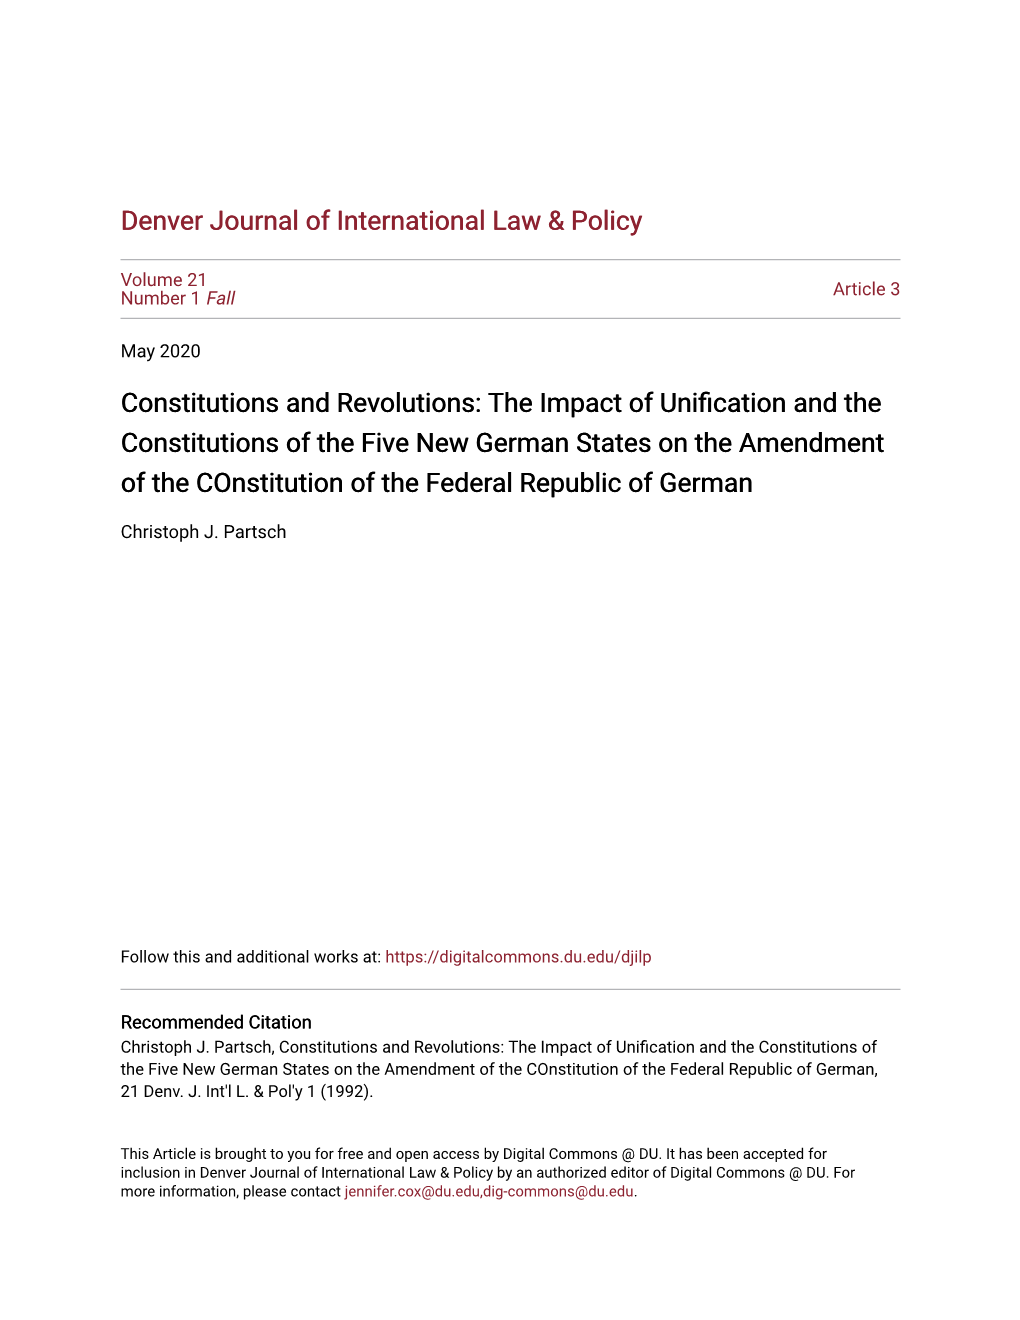 Constitutions and Revolutions